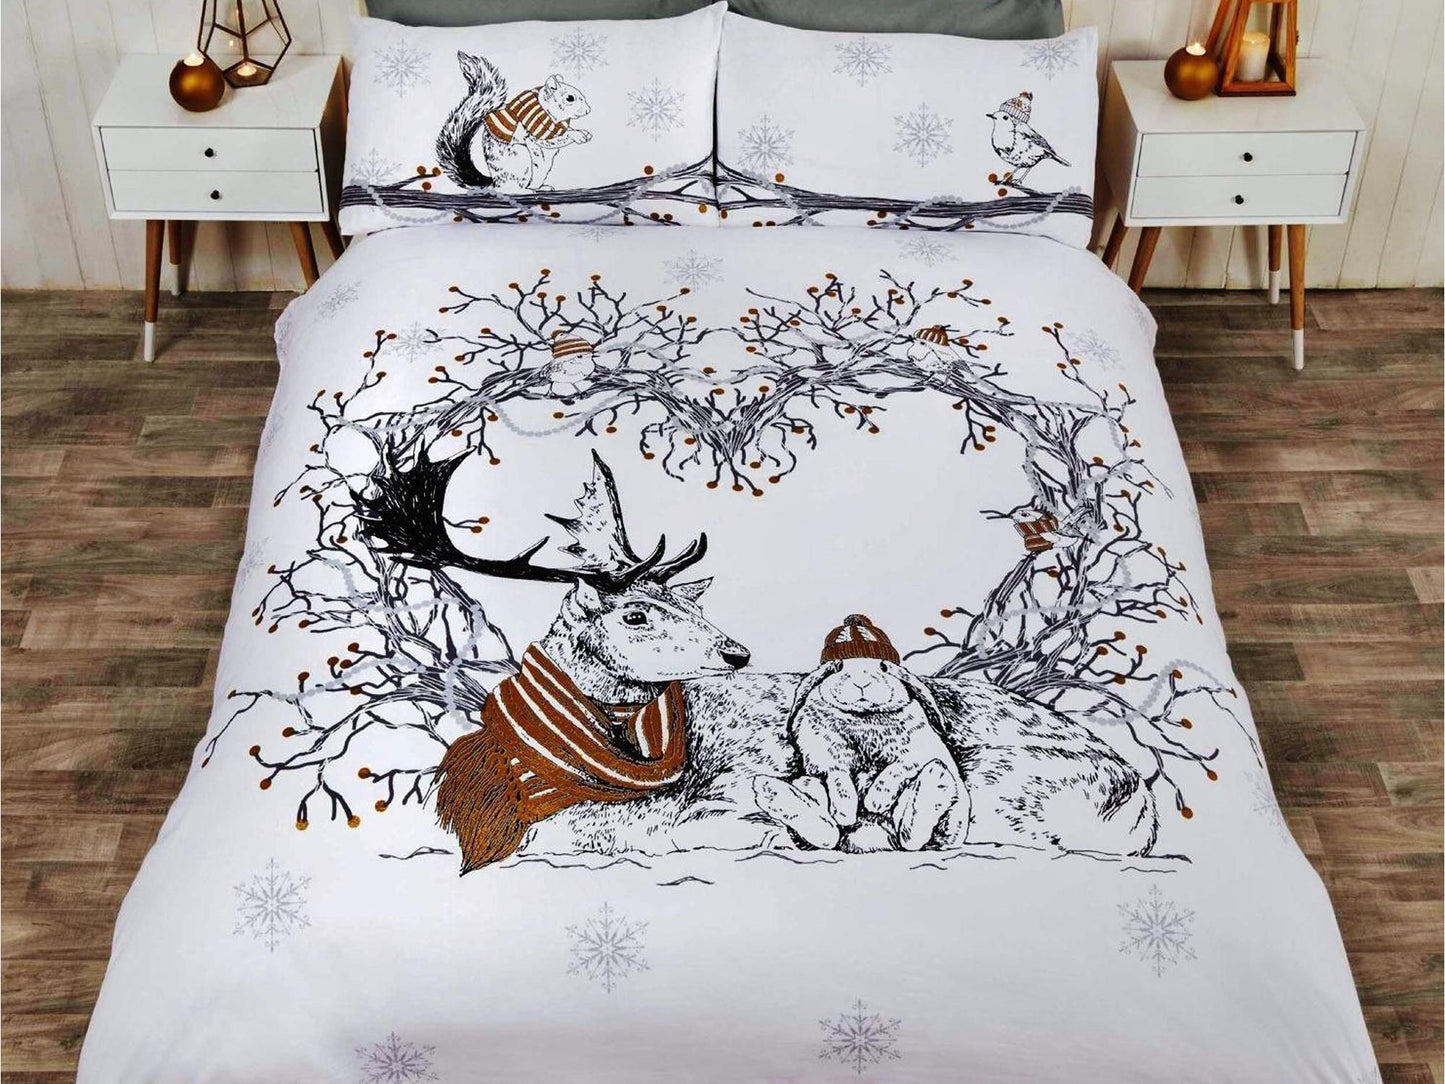 Stag & Friends Christmas Bedding Set Gold